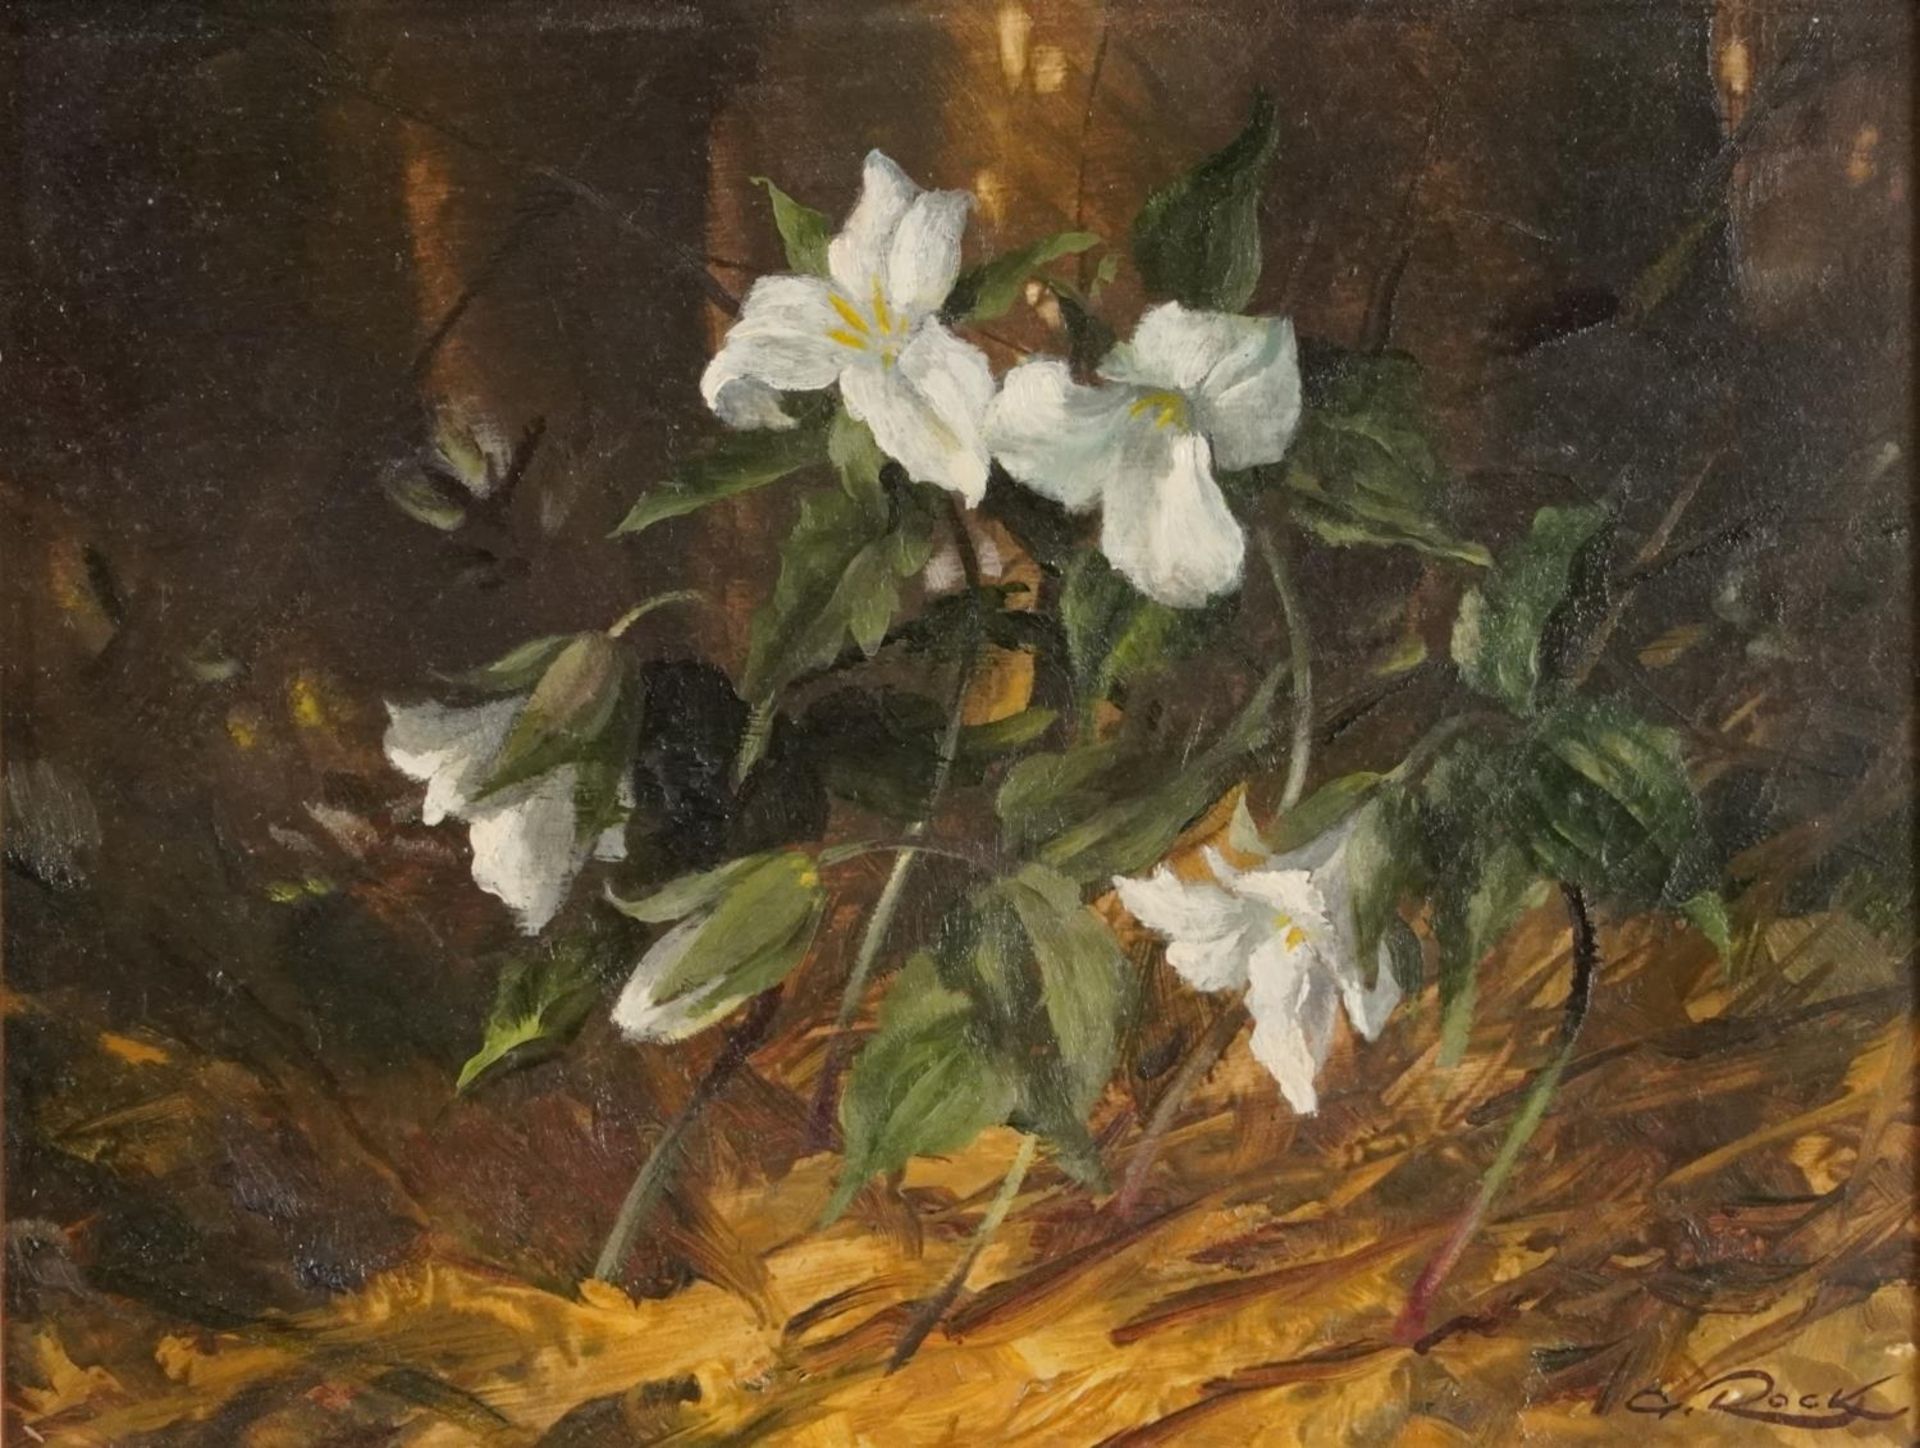 Geoffrey Rock - Trilliums, The Flower of Ontario, Canadian oil on board, label verso, mounted and